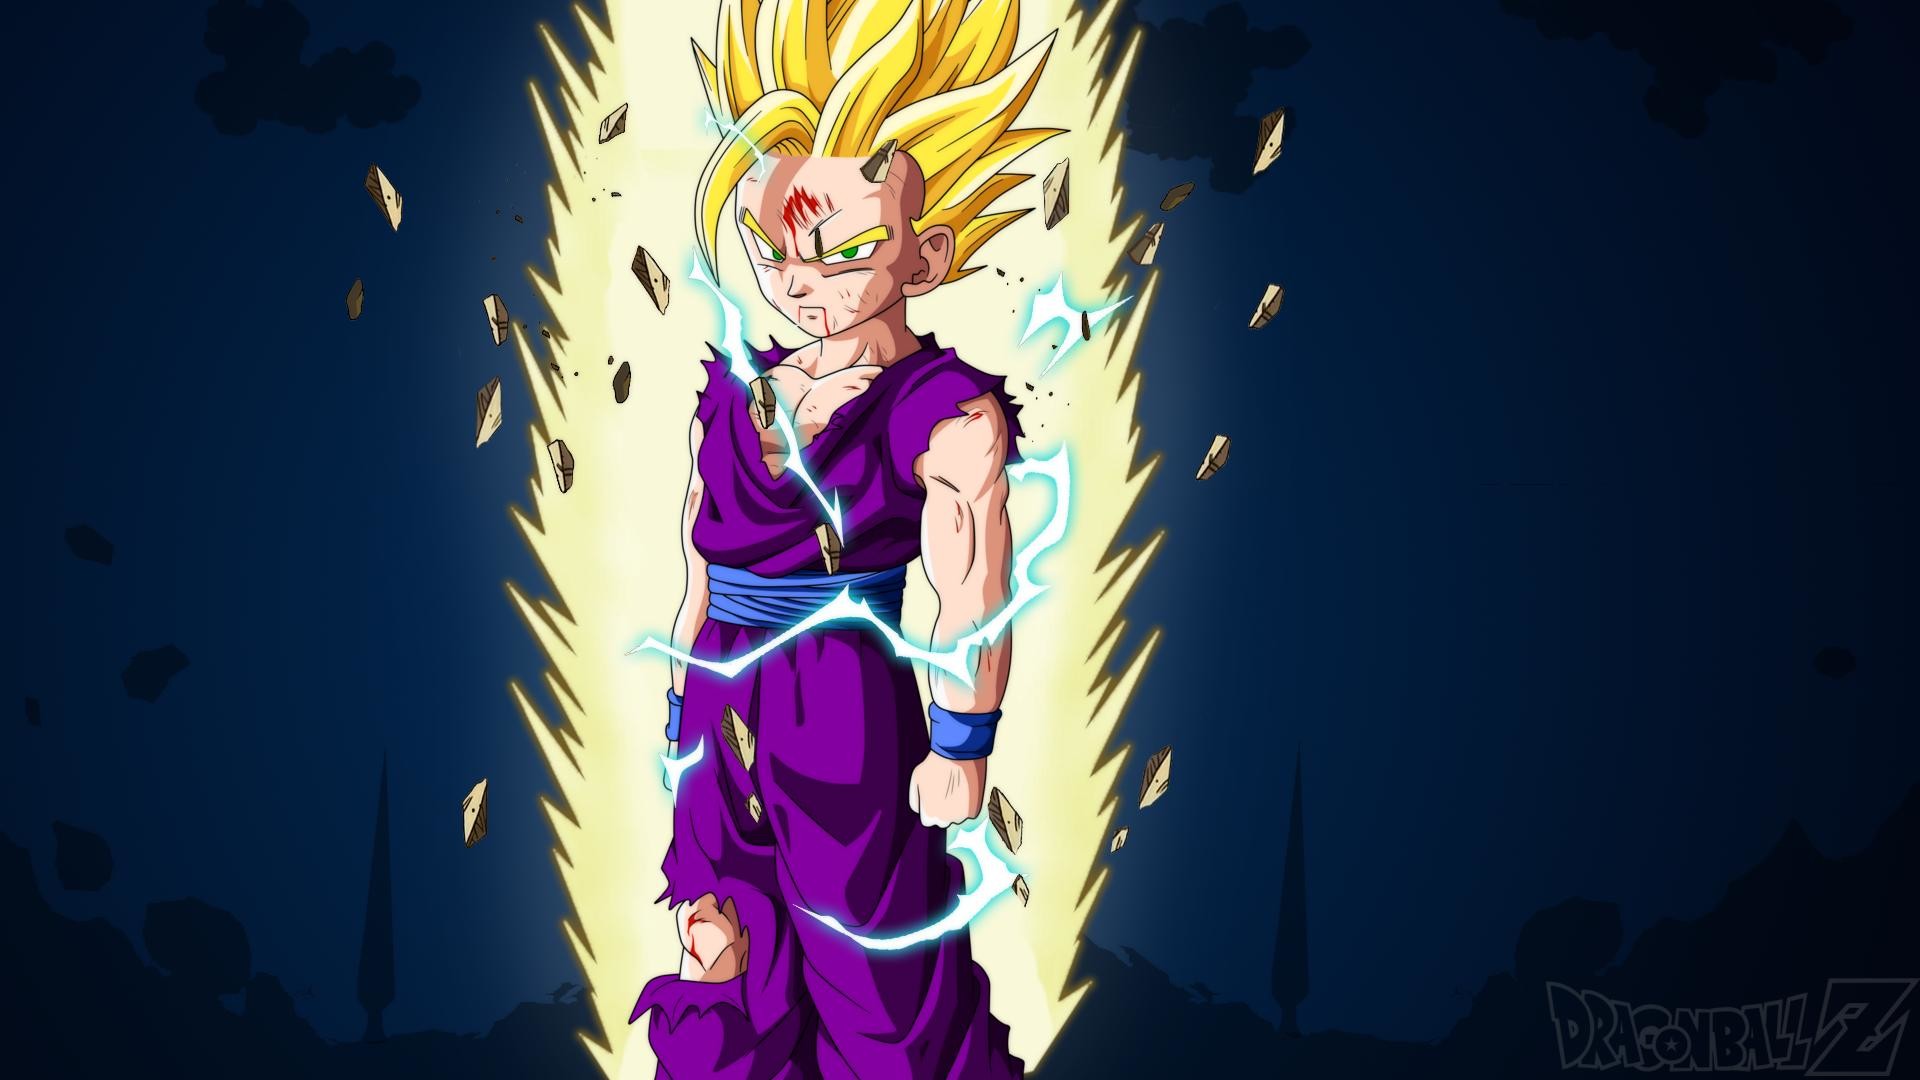 1920x1080 A Wallpaper about the best Anime ever. Dragonball Z Son Gohan